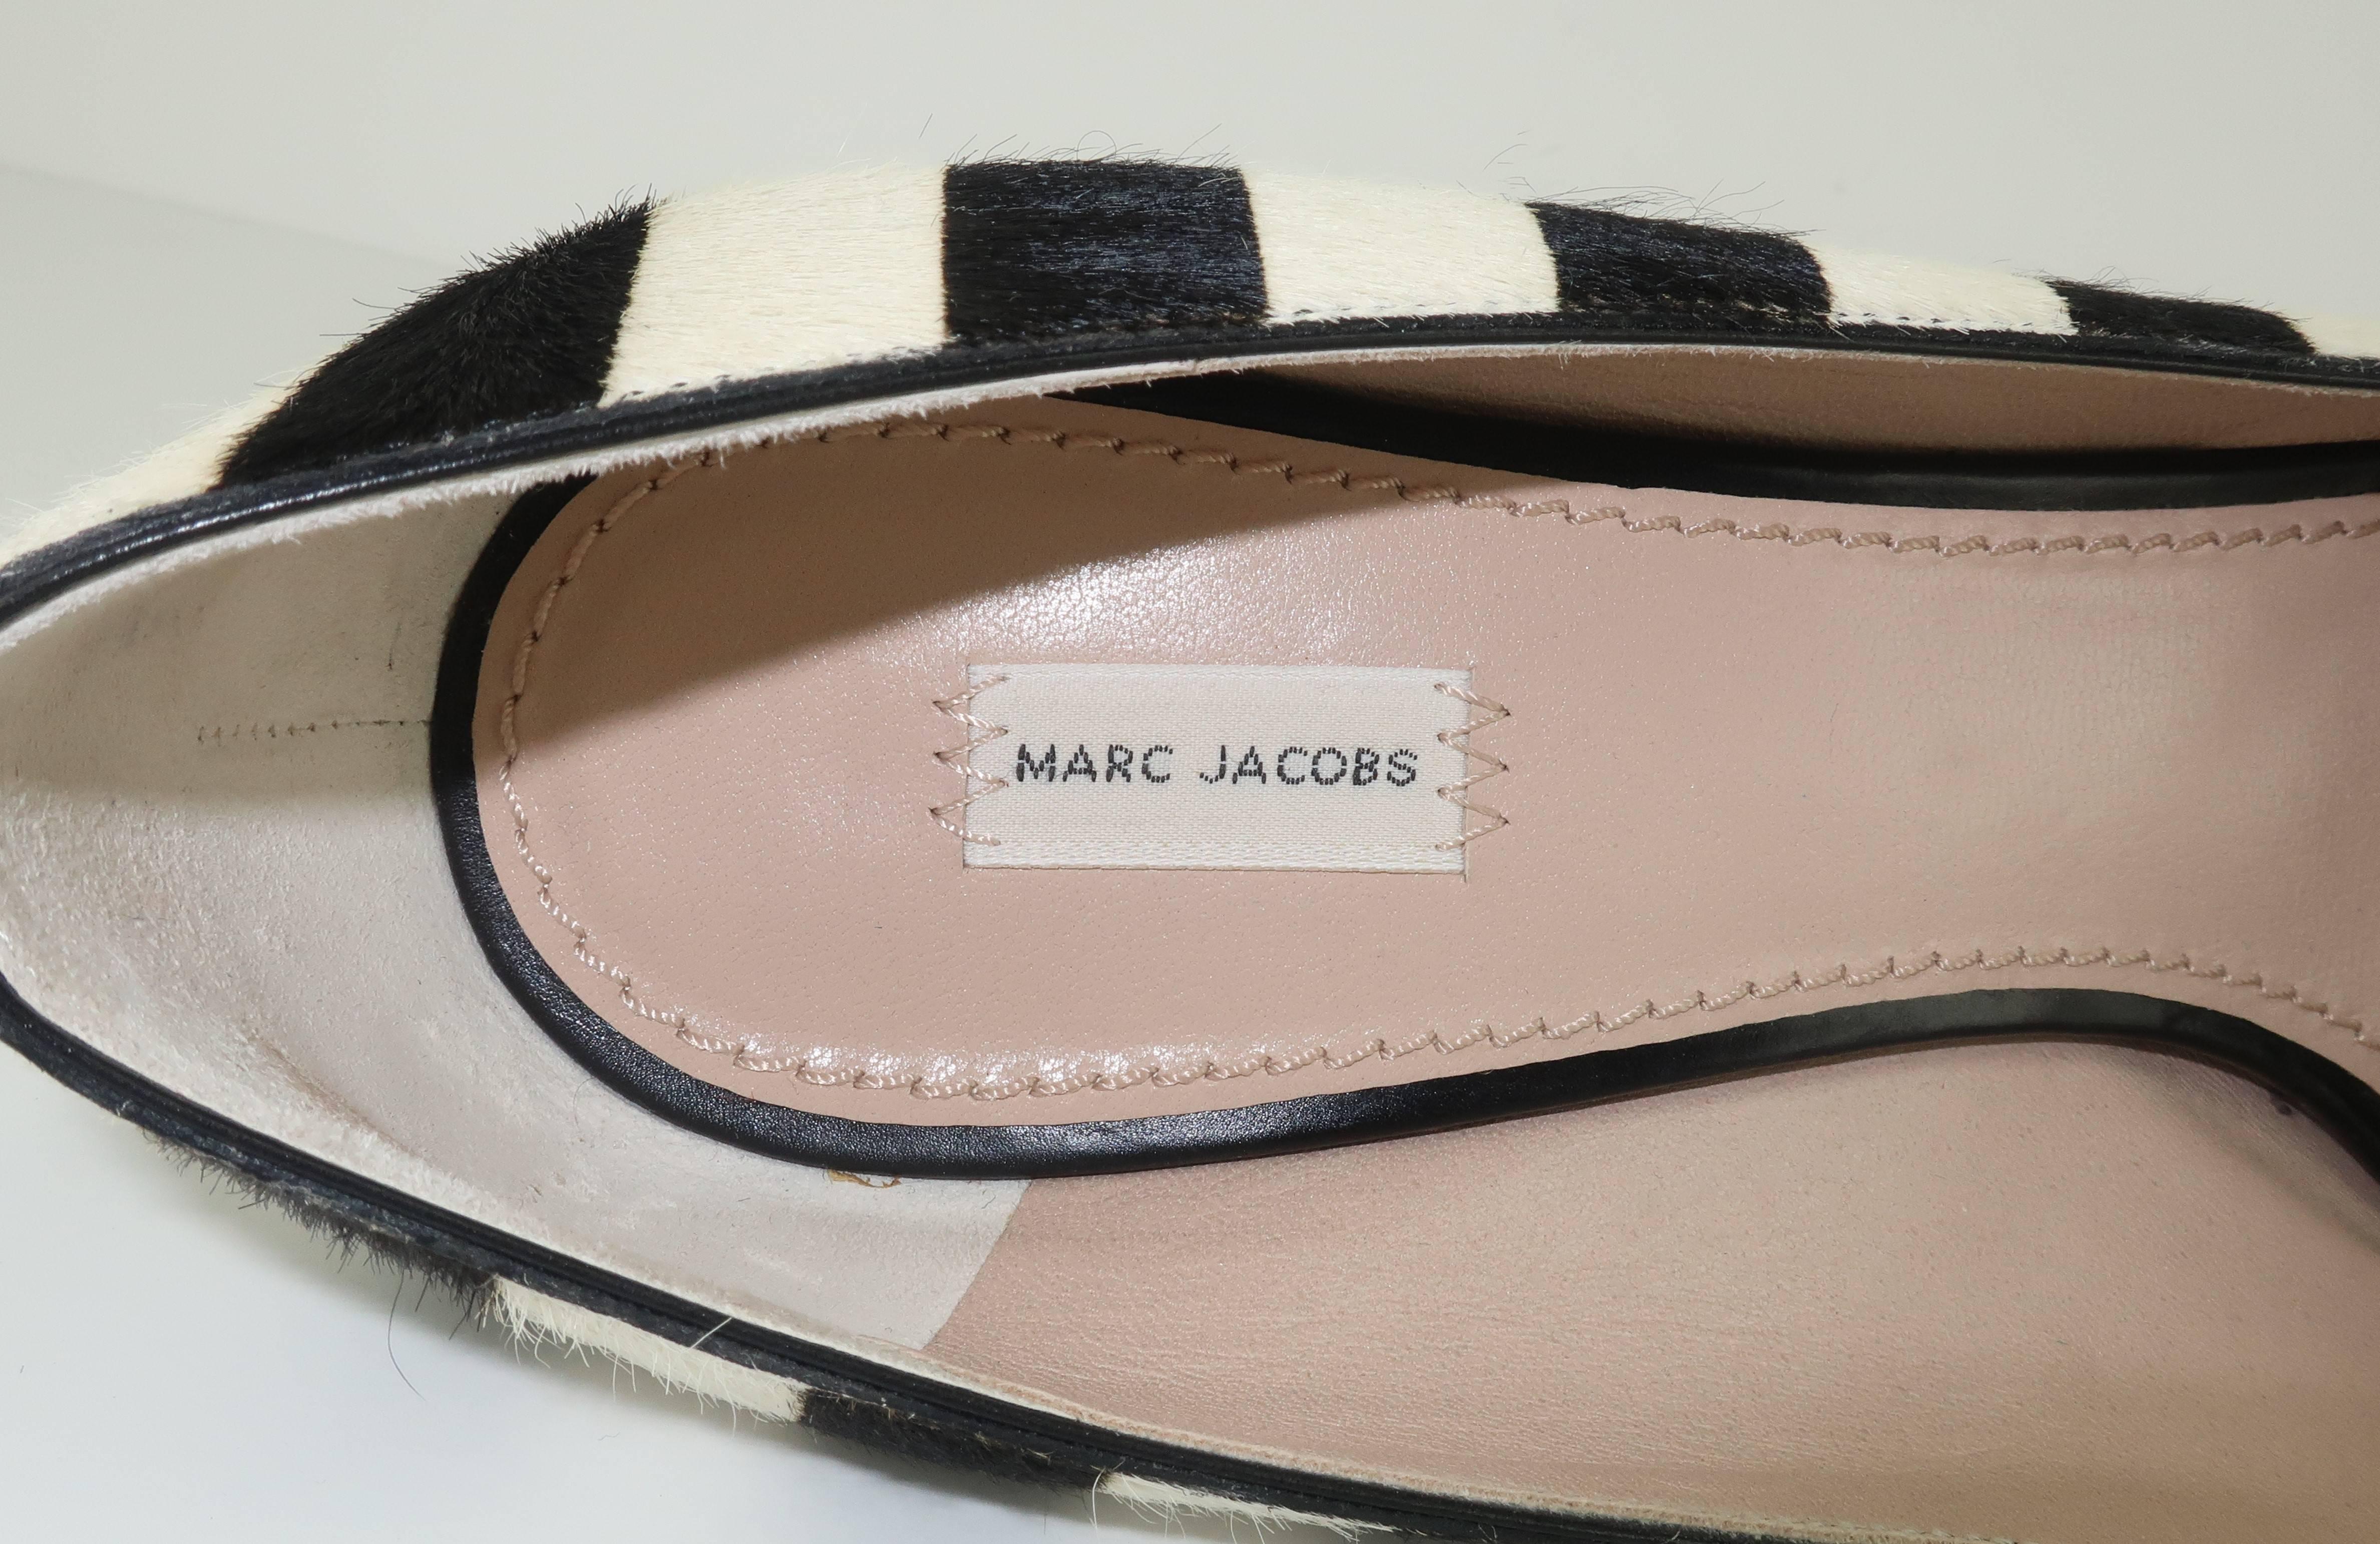 Marc Jacobs Pointy Toe Mary Jane Pony Striped Shoes In Excellent Condition For Sale In Atlanta, GA